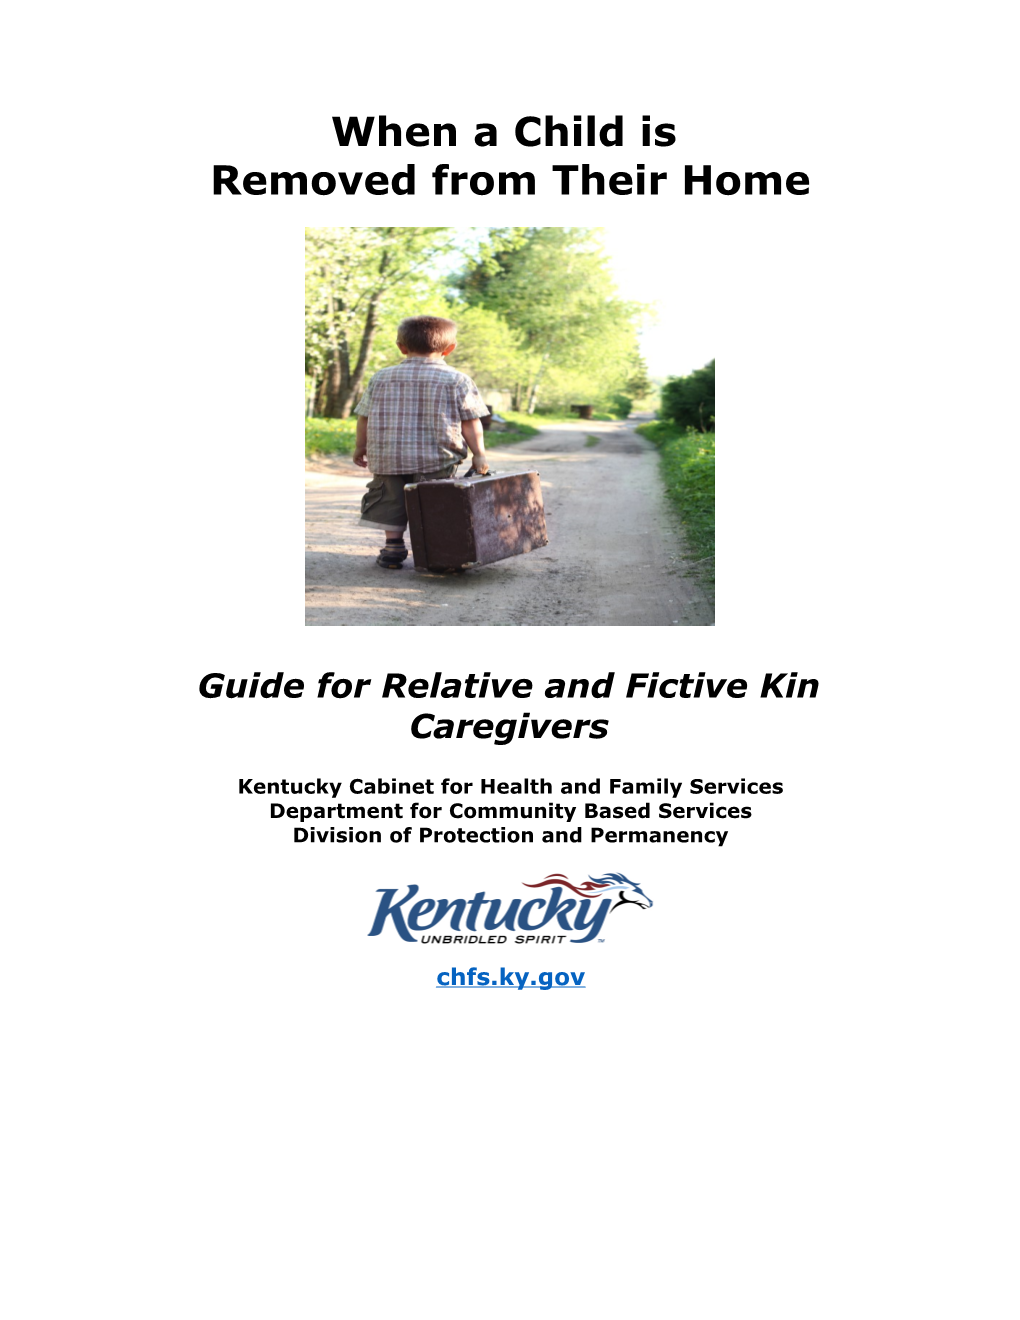 Guide For Relative And Fictive Kin Caregivers